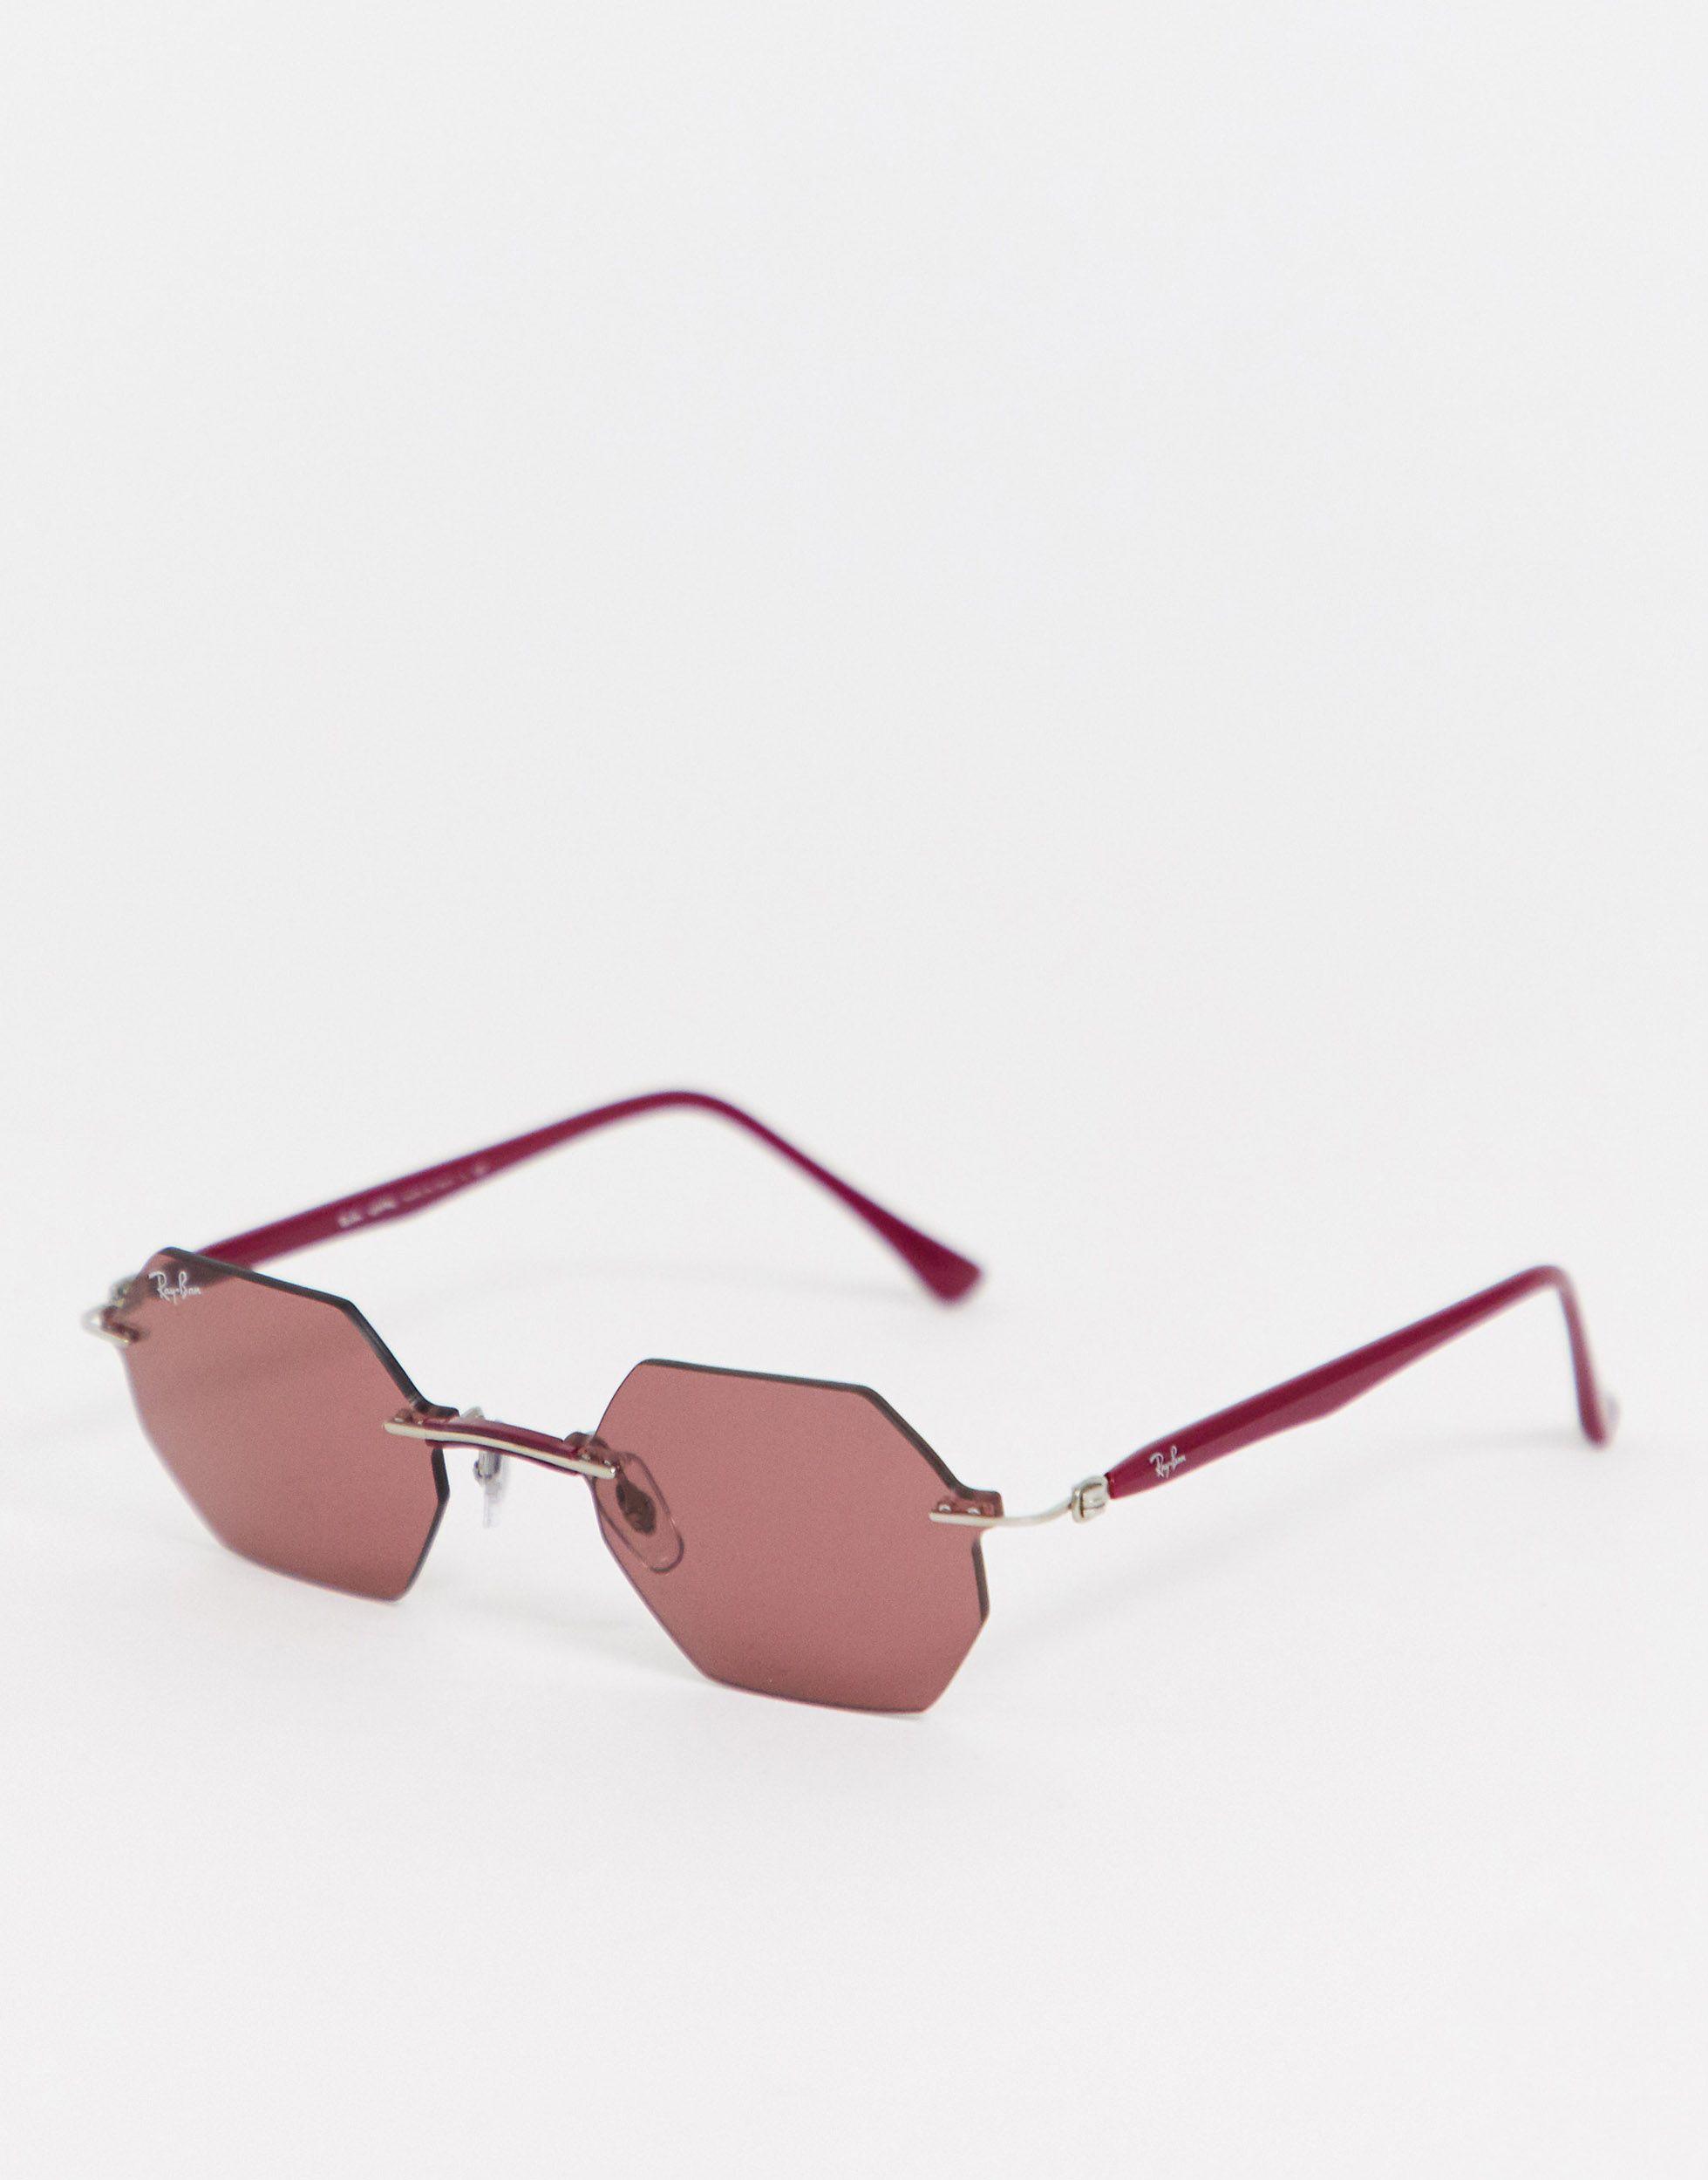 Ray-Ban Synthetic 0rb8061 Hexagonal Rimless Sunglasses in Pink - Lyst